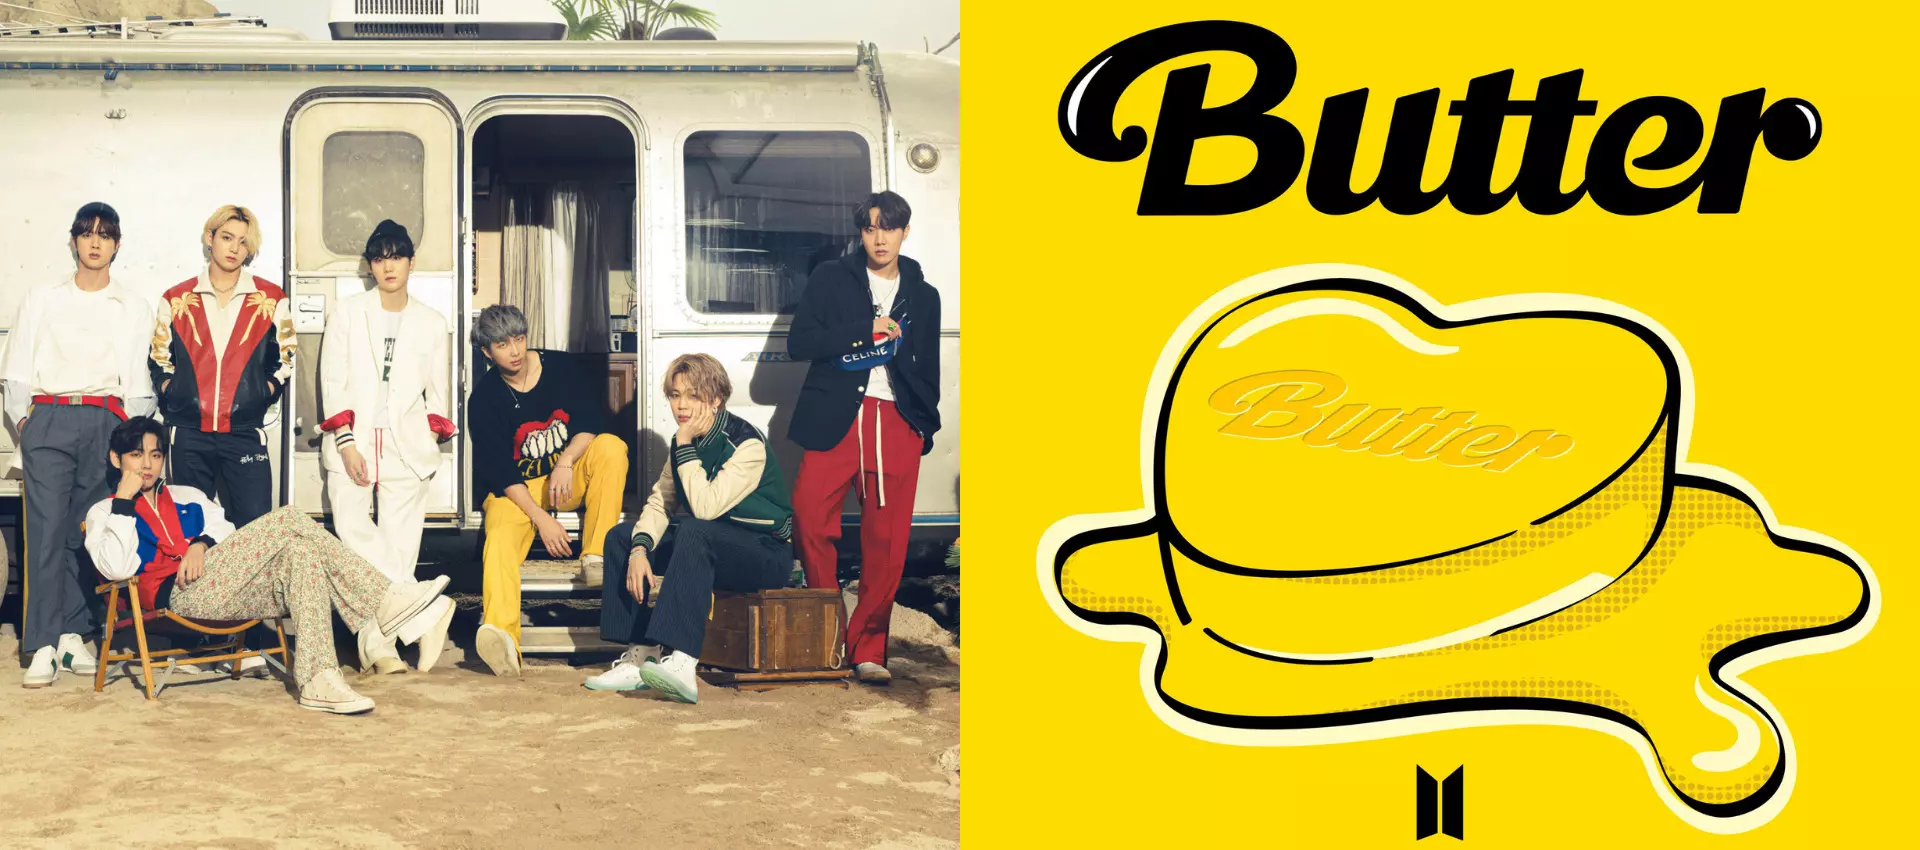 BTS to drop new single Butter on May 21